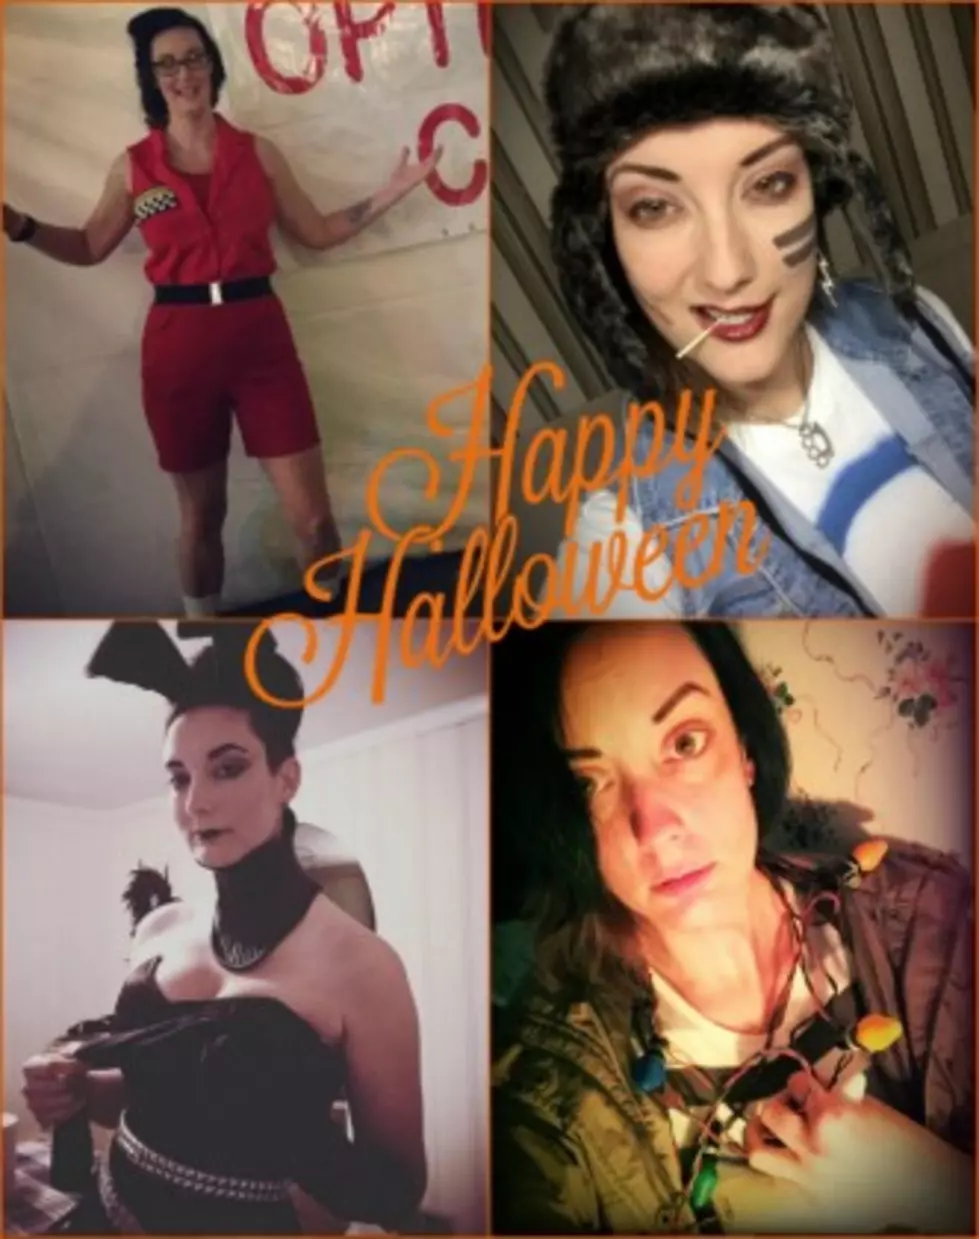 More Than One Halloween Costume &#8212; I Take This Seriously, People [PHOTOS]